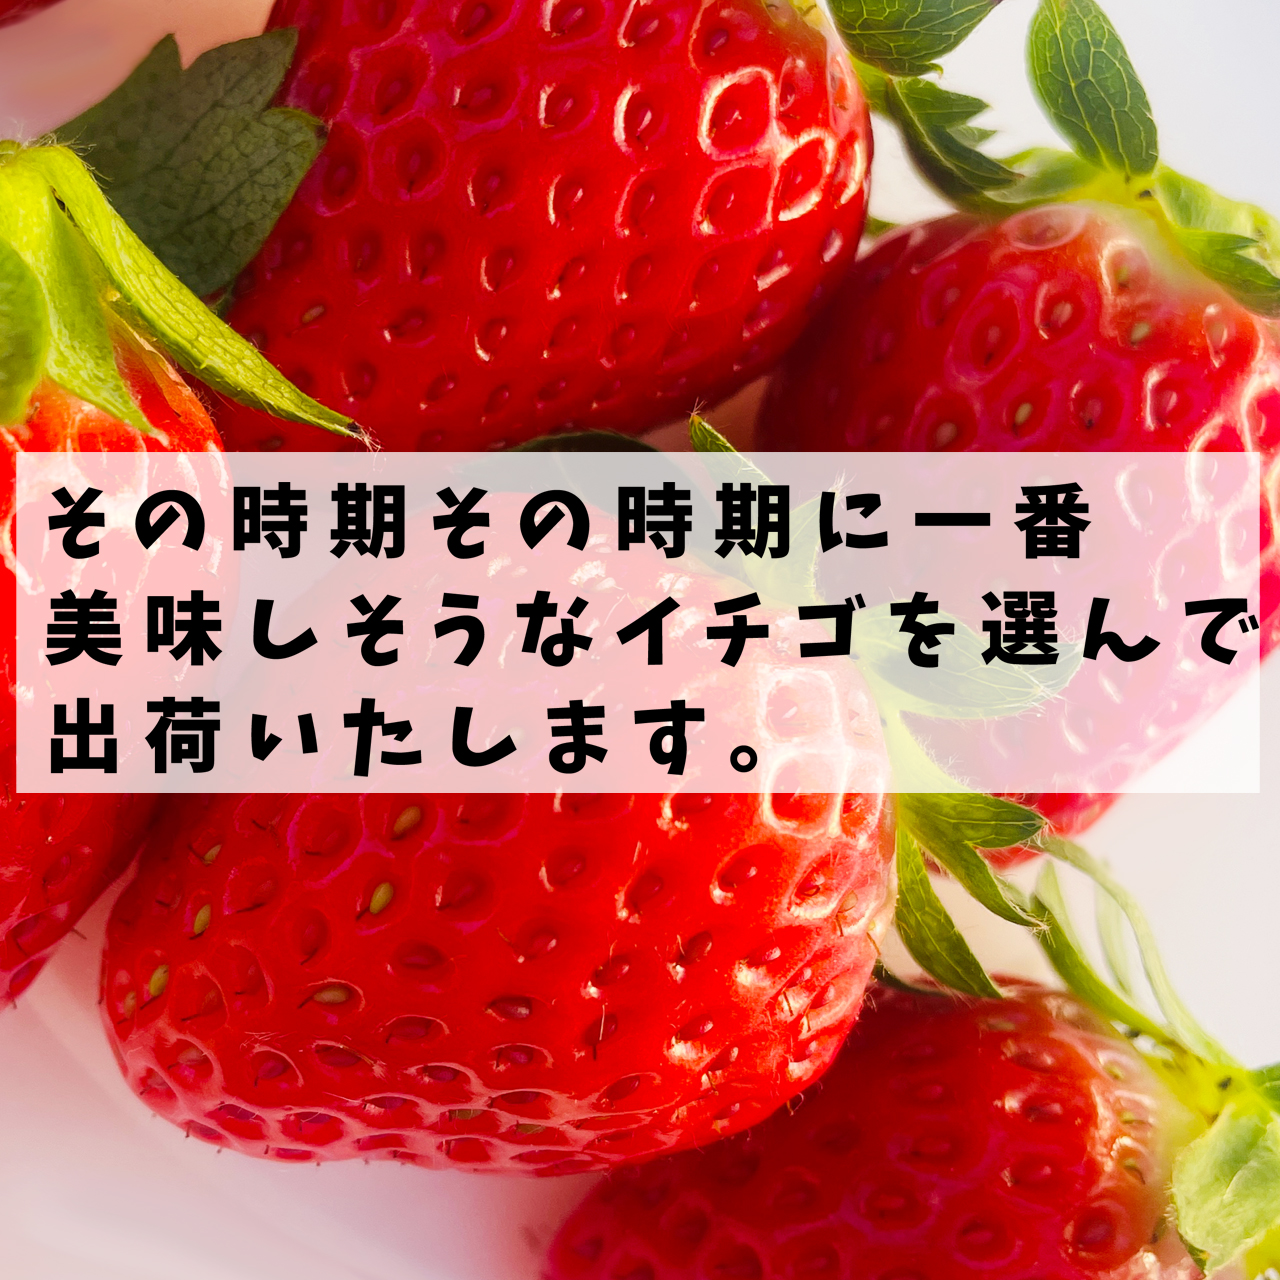  strawberry Shiga prefecture 1 box 2P entering [ free shipping ] this term sale end therefore 12 month .. shipping minute. reservation ..... - 